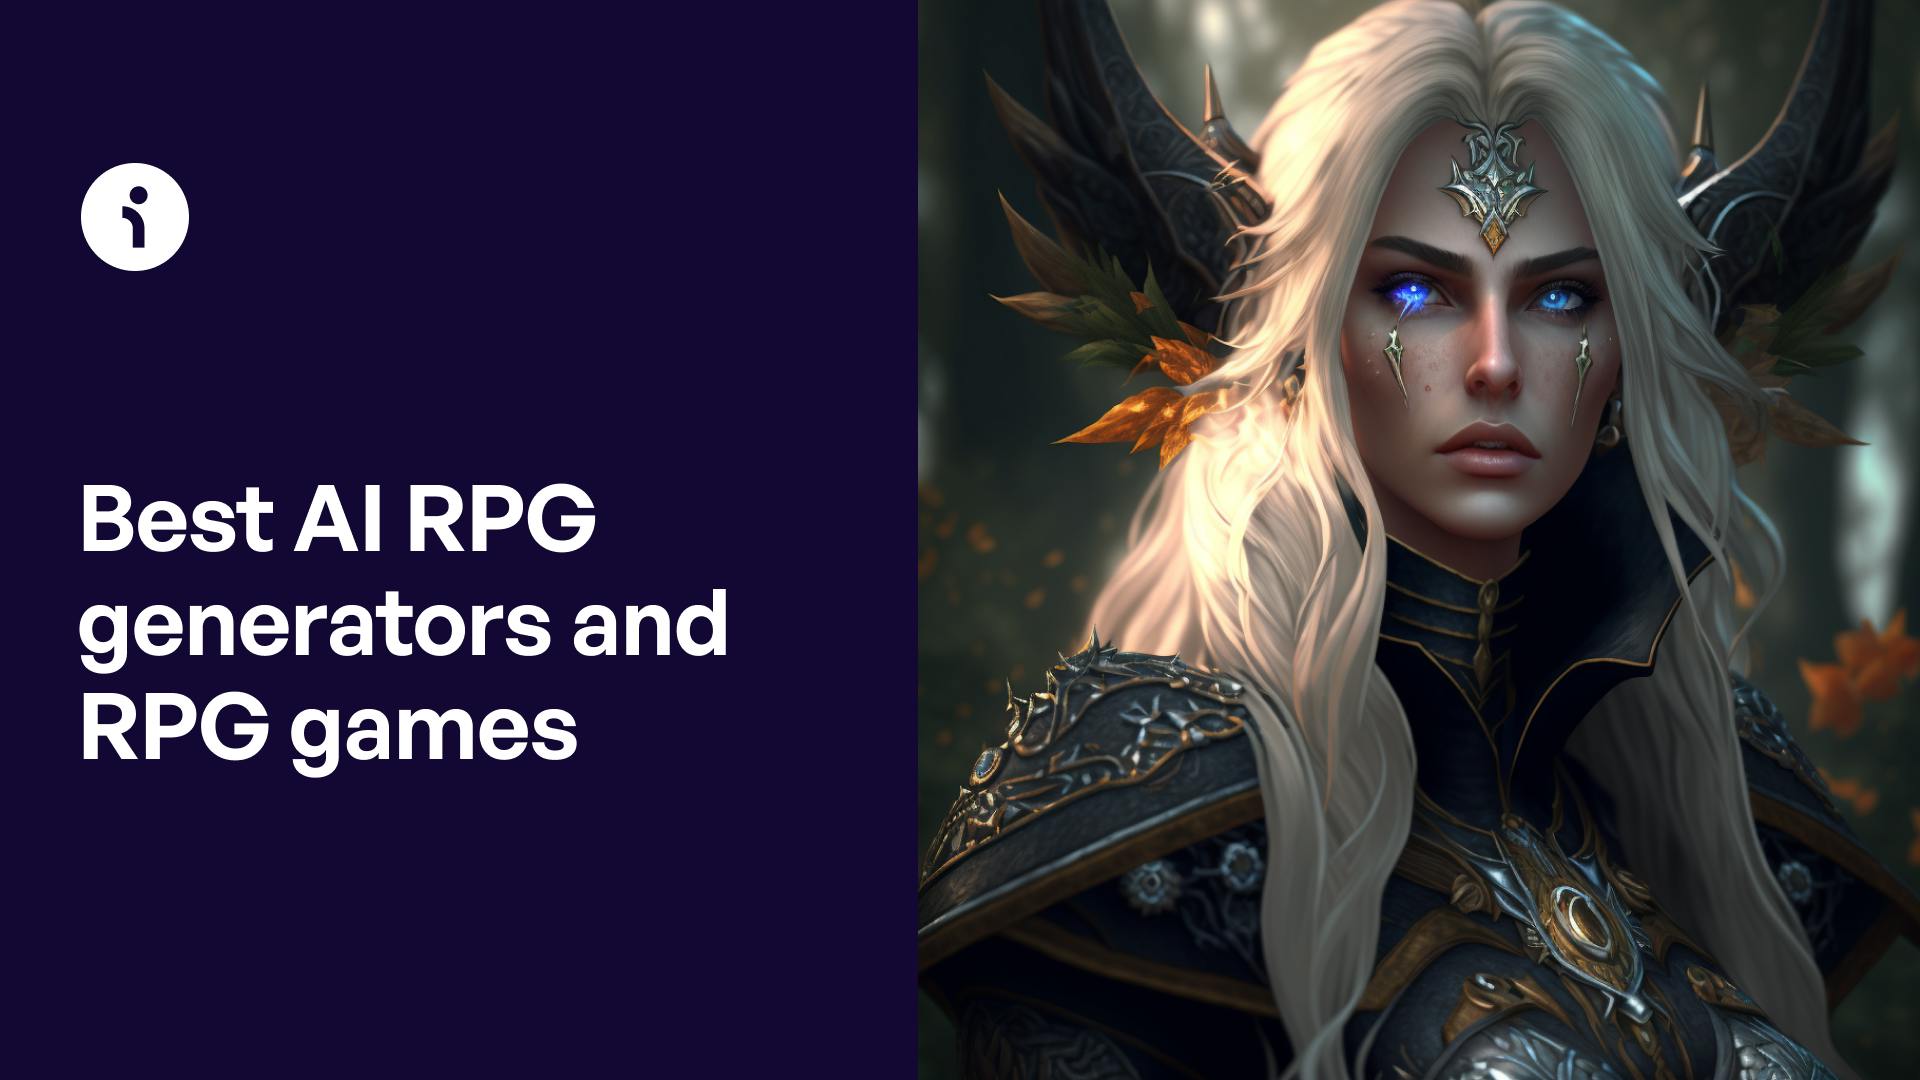 AI generated RPG,  AI roleplay, AI RPG character generator,  RPG Games with AI Companions, Text RPG AI, AI RPG Games,  Best AI RPG,  AI RPG Map Generator, Action RPG with AI Companions, Action RPG with Player AI, AI in RPG Games